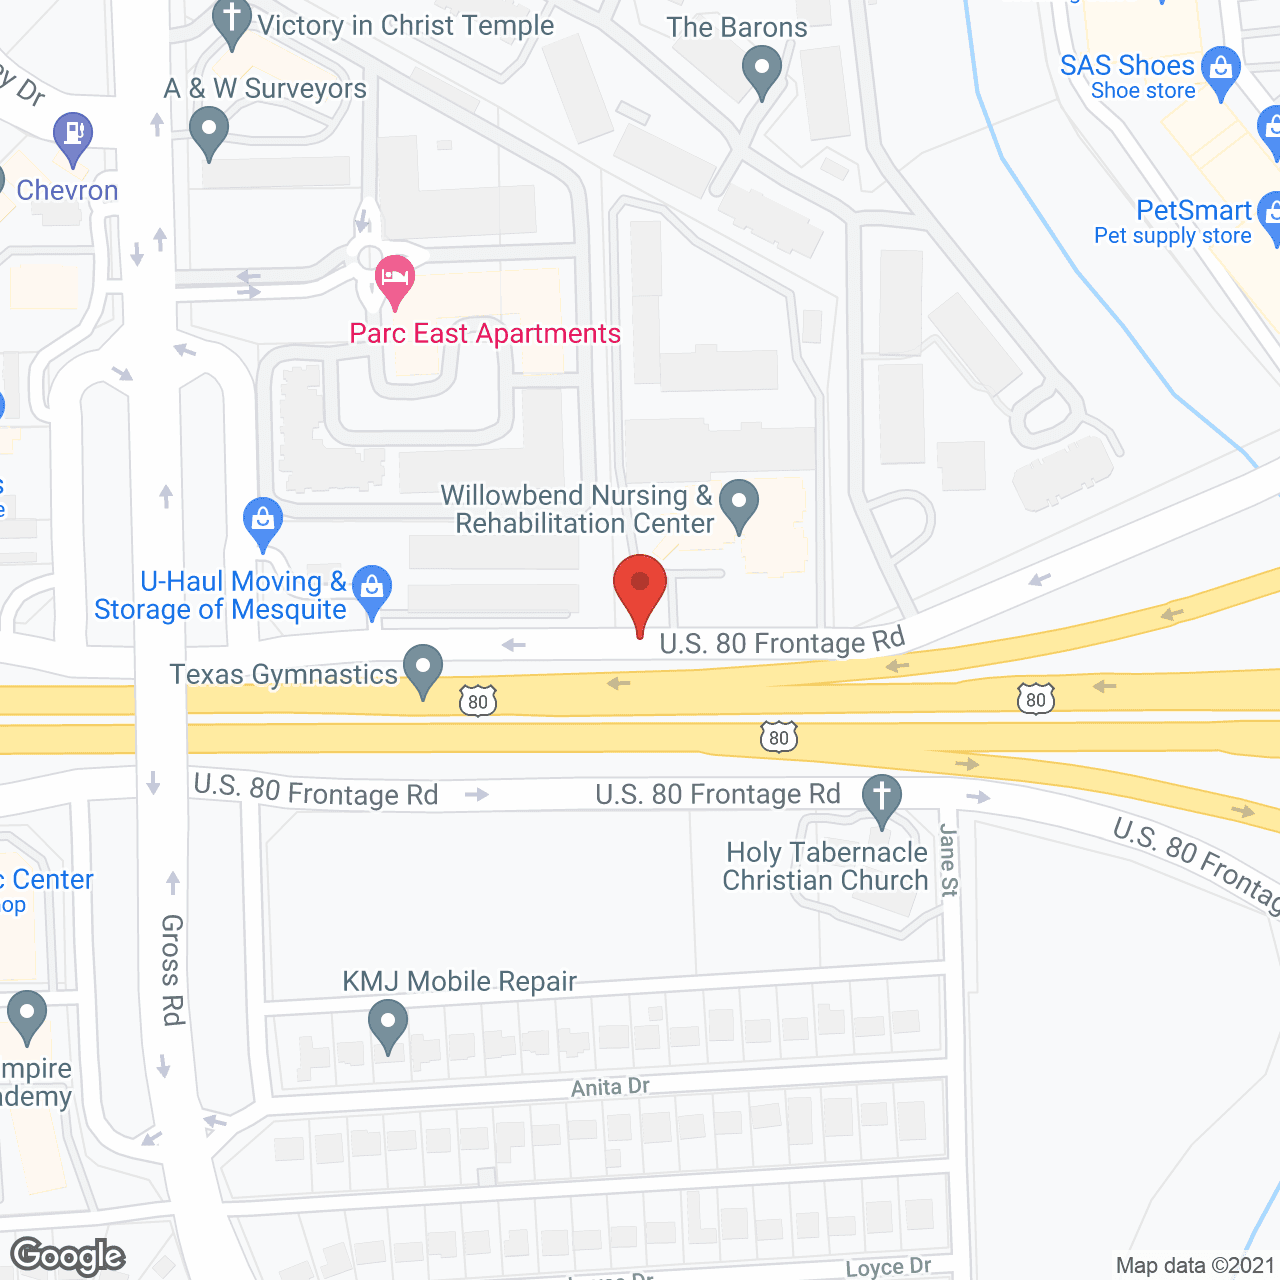 Willow Bend Nursing and Rehabilitation in google map